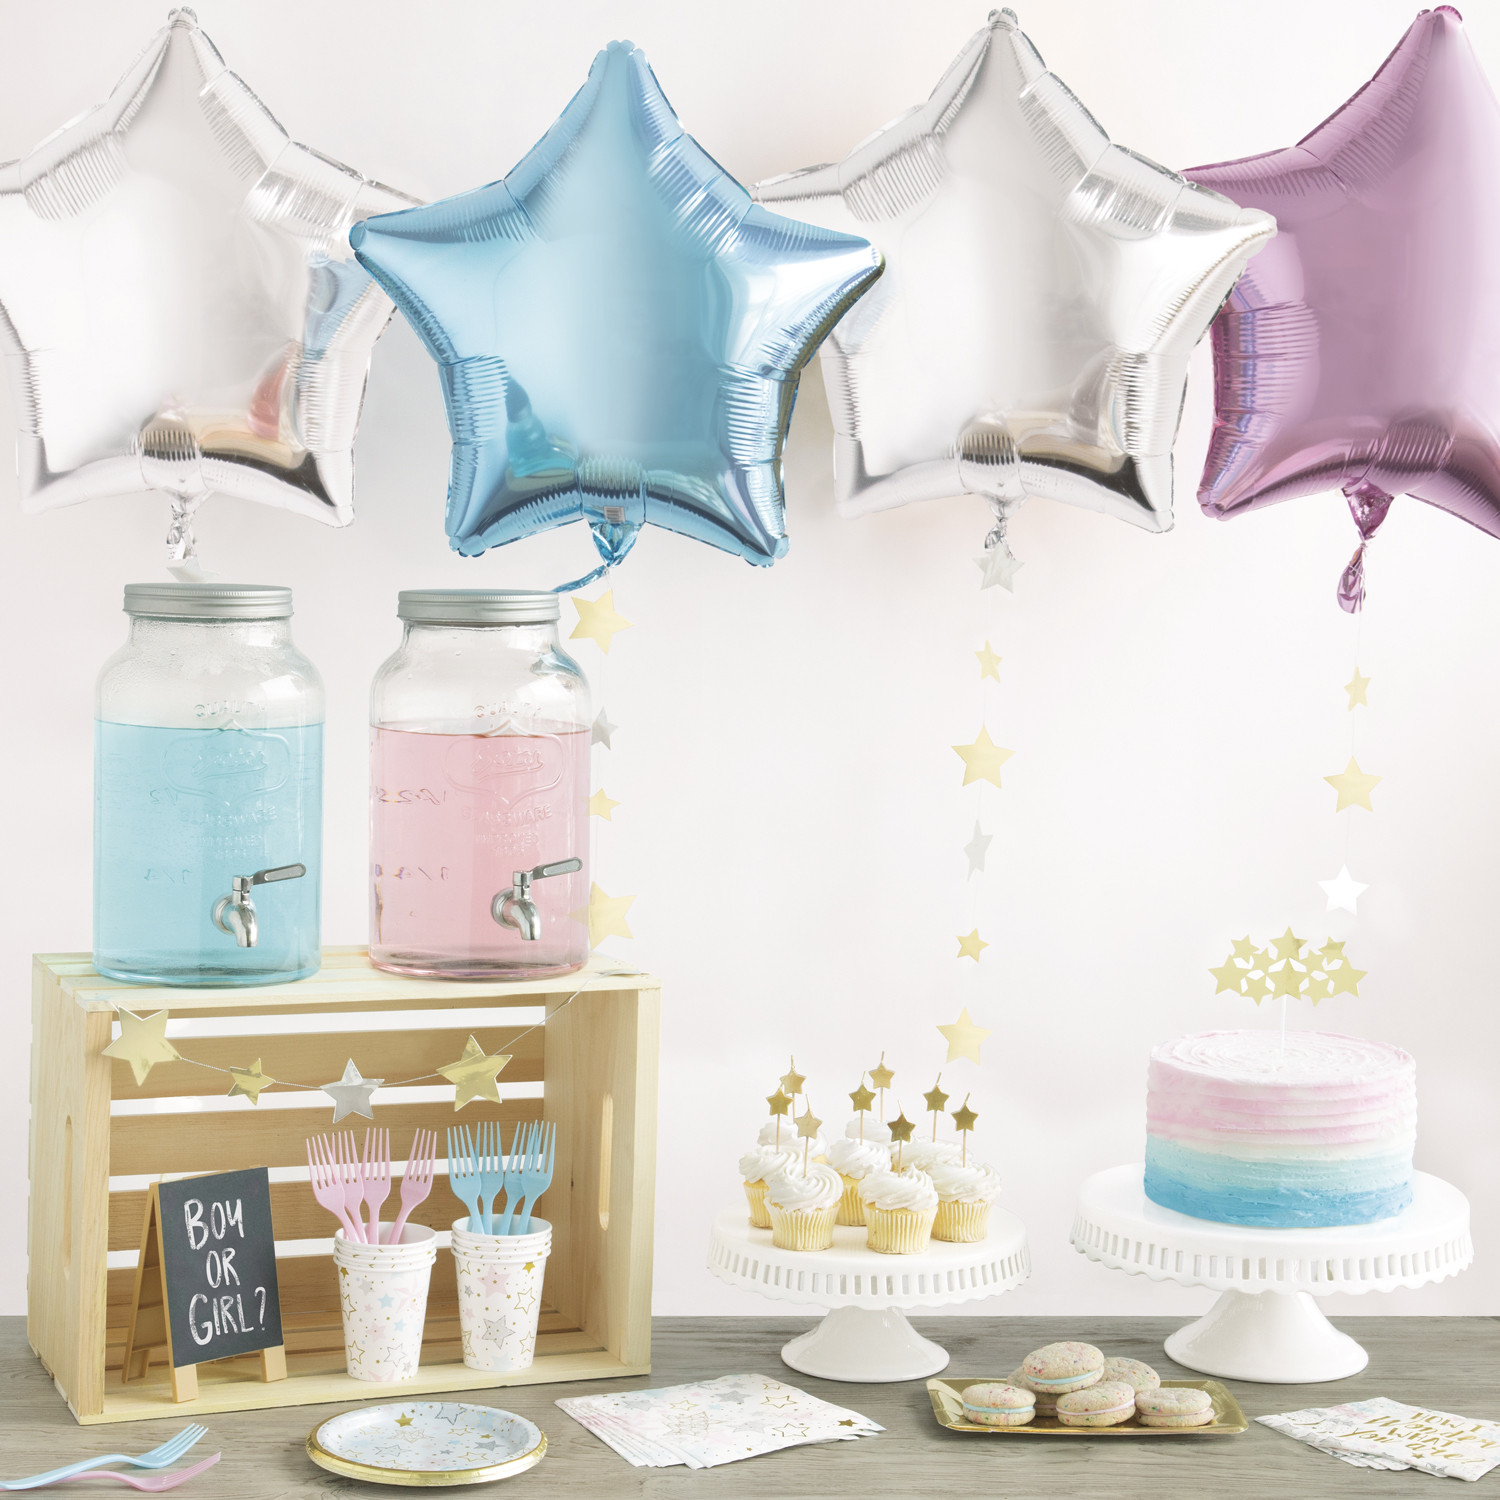 Gender Reveal Theme Party Ideas
 Gender Reveal Party Ideas